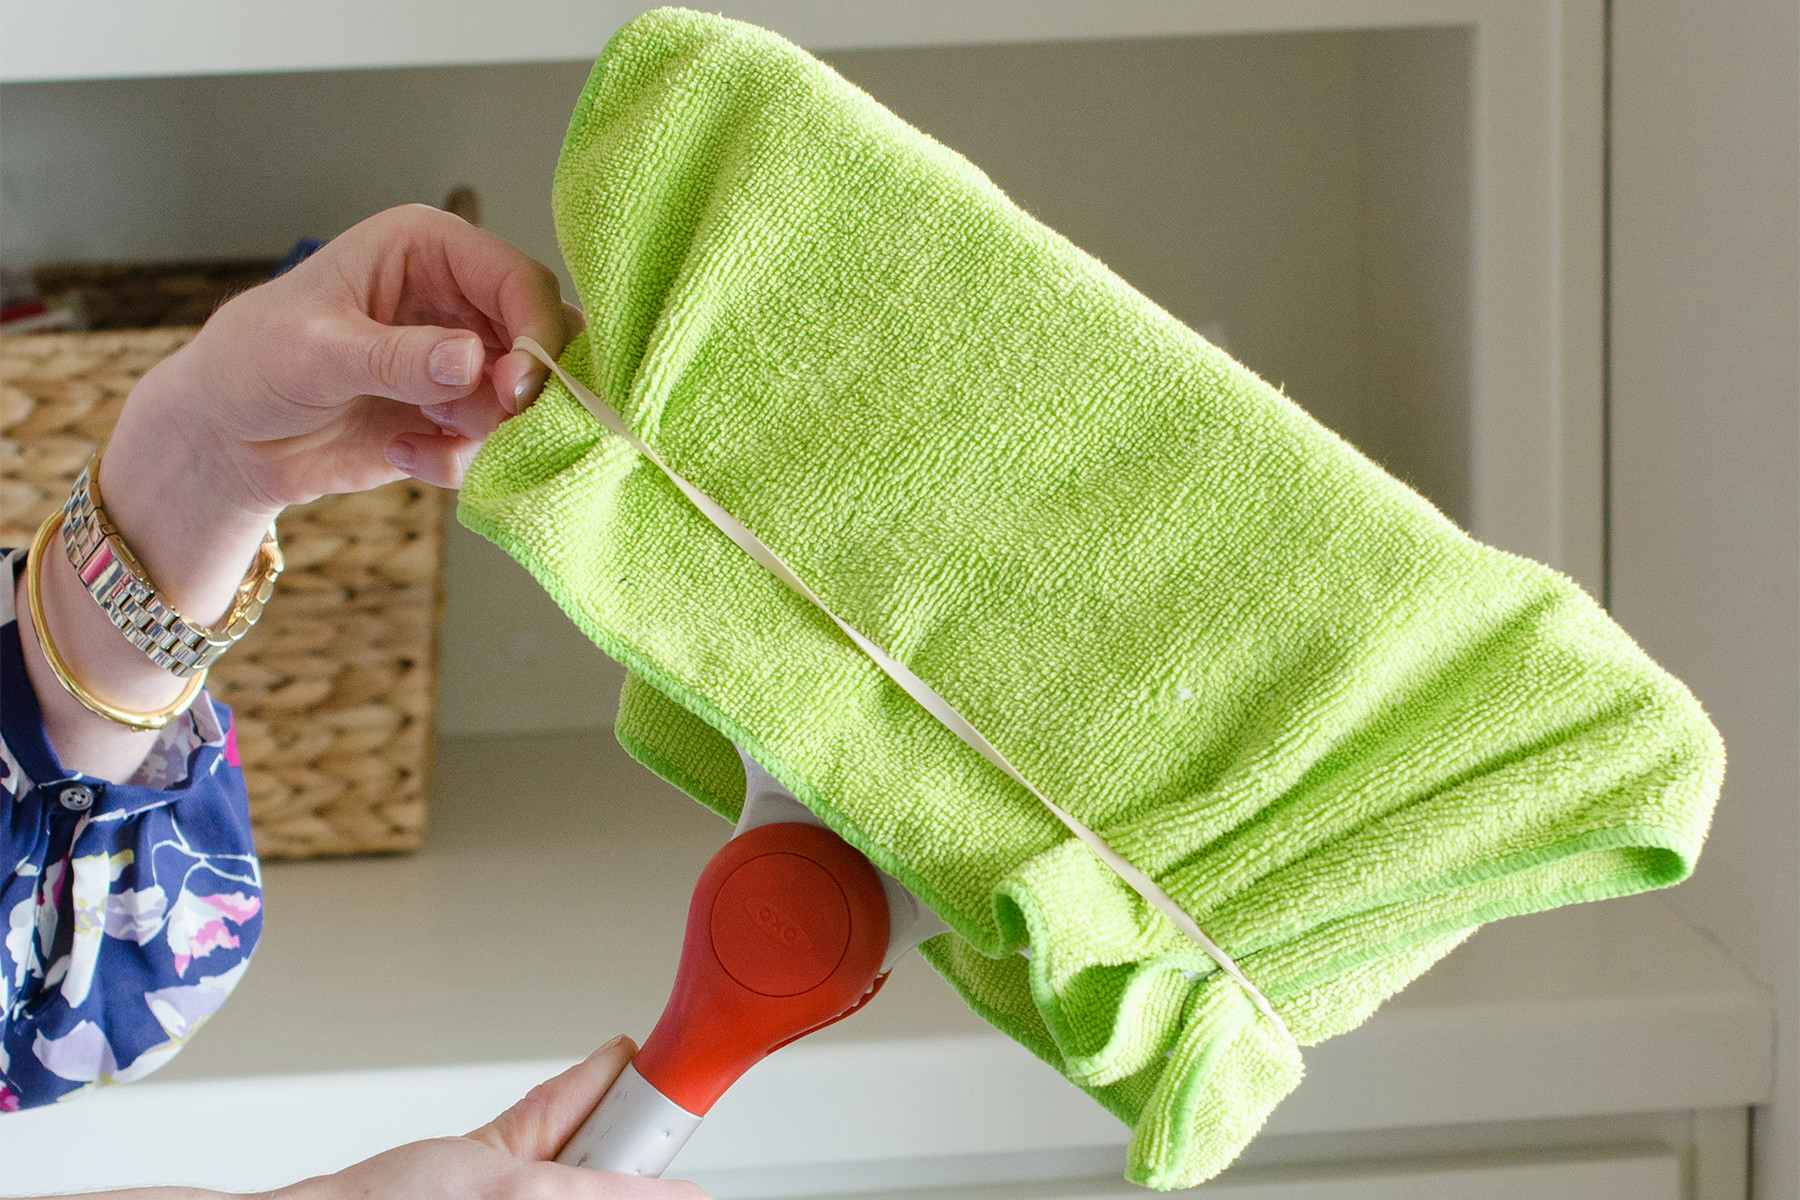 someone using a rubber band to secure a microfiber cloth over a broom.